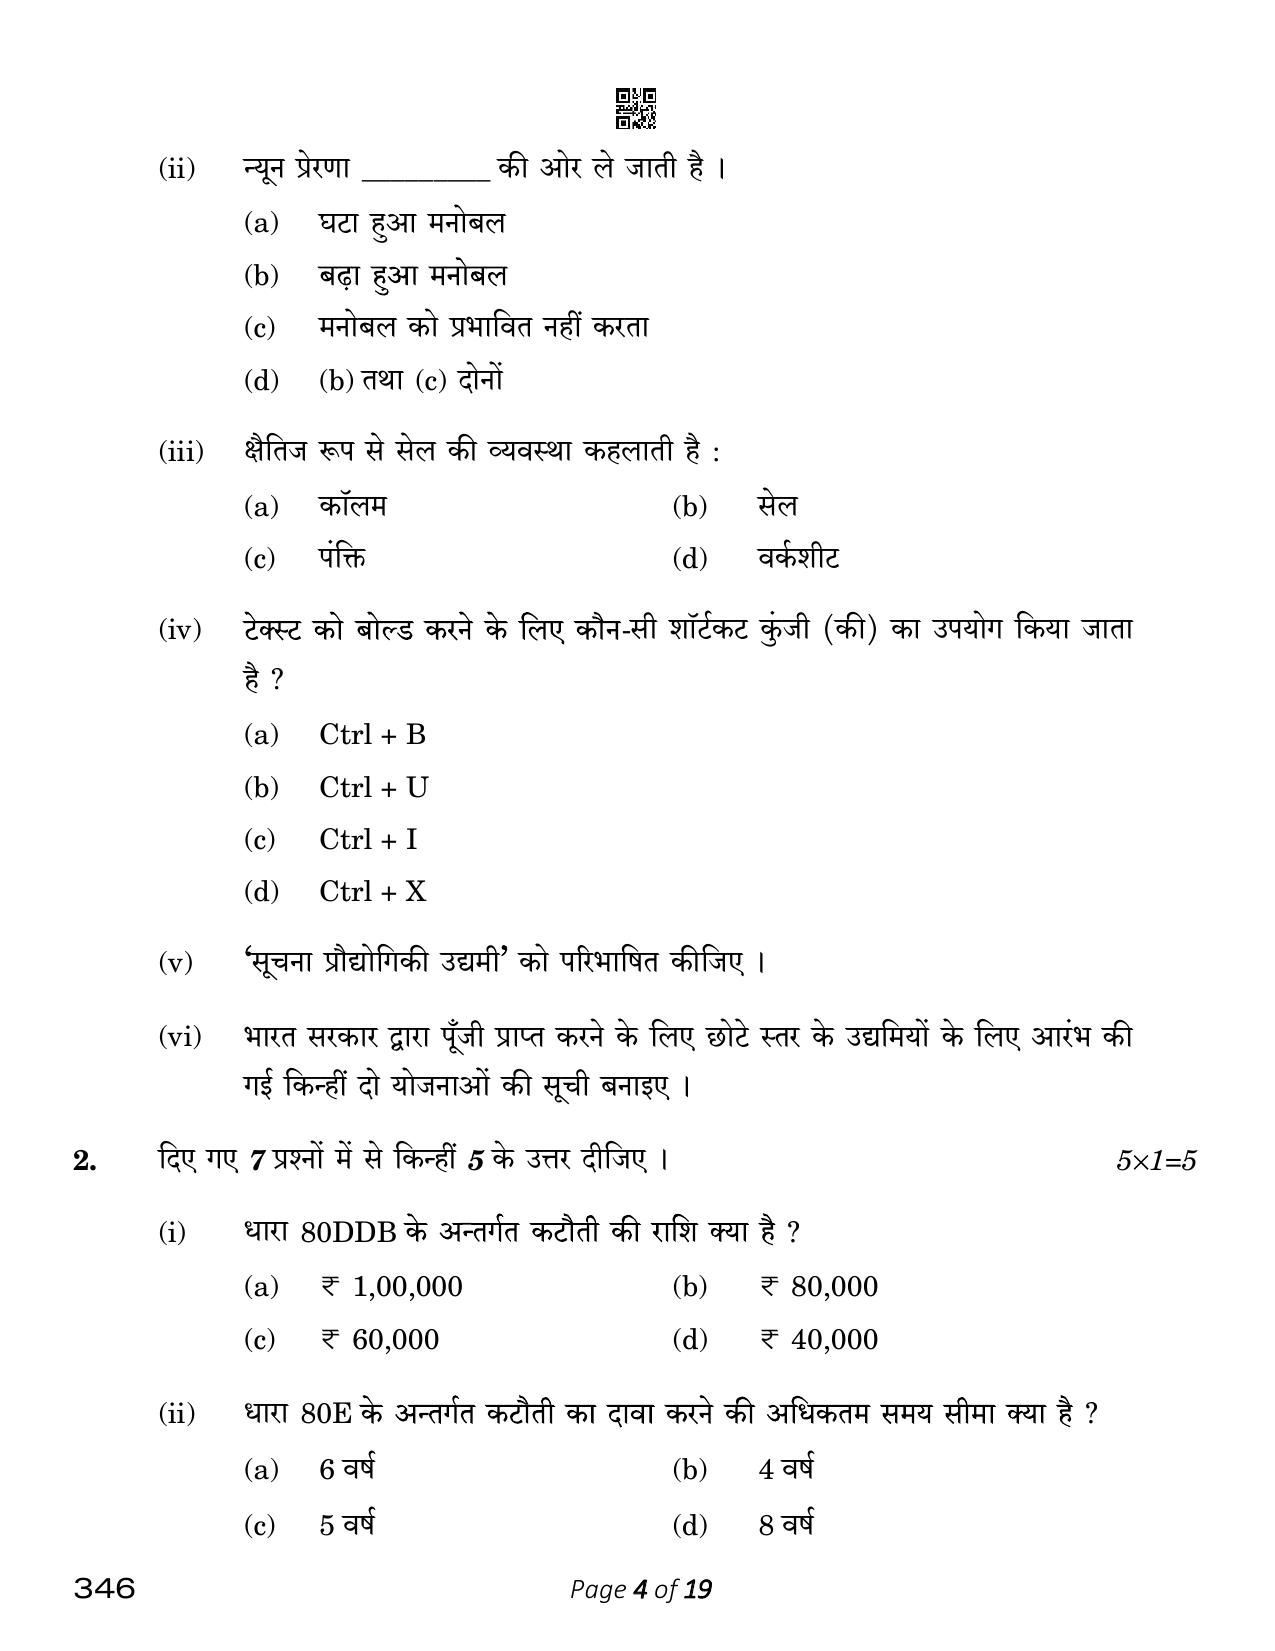 CBSE Class 12 Taxation (Compartment) 2023 Question Paper - Page 4